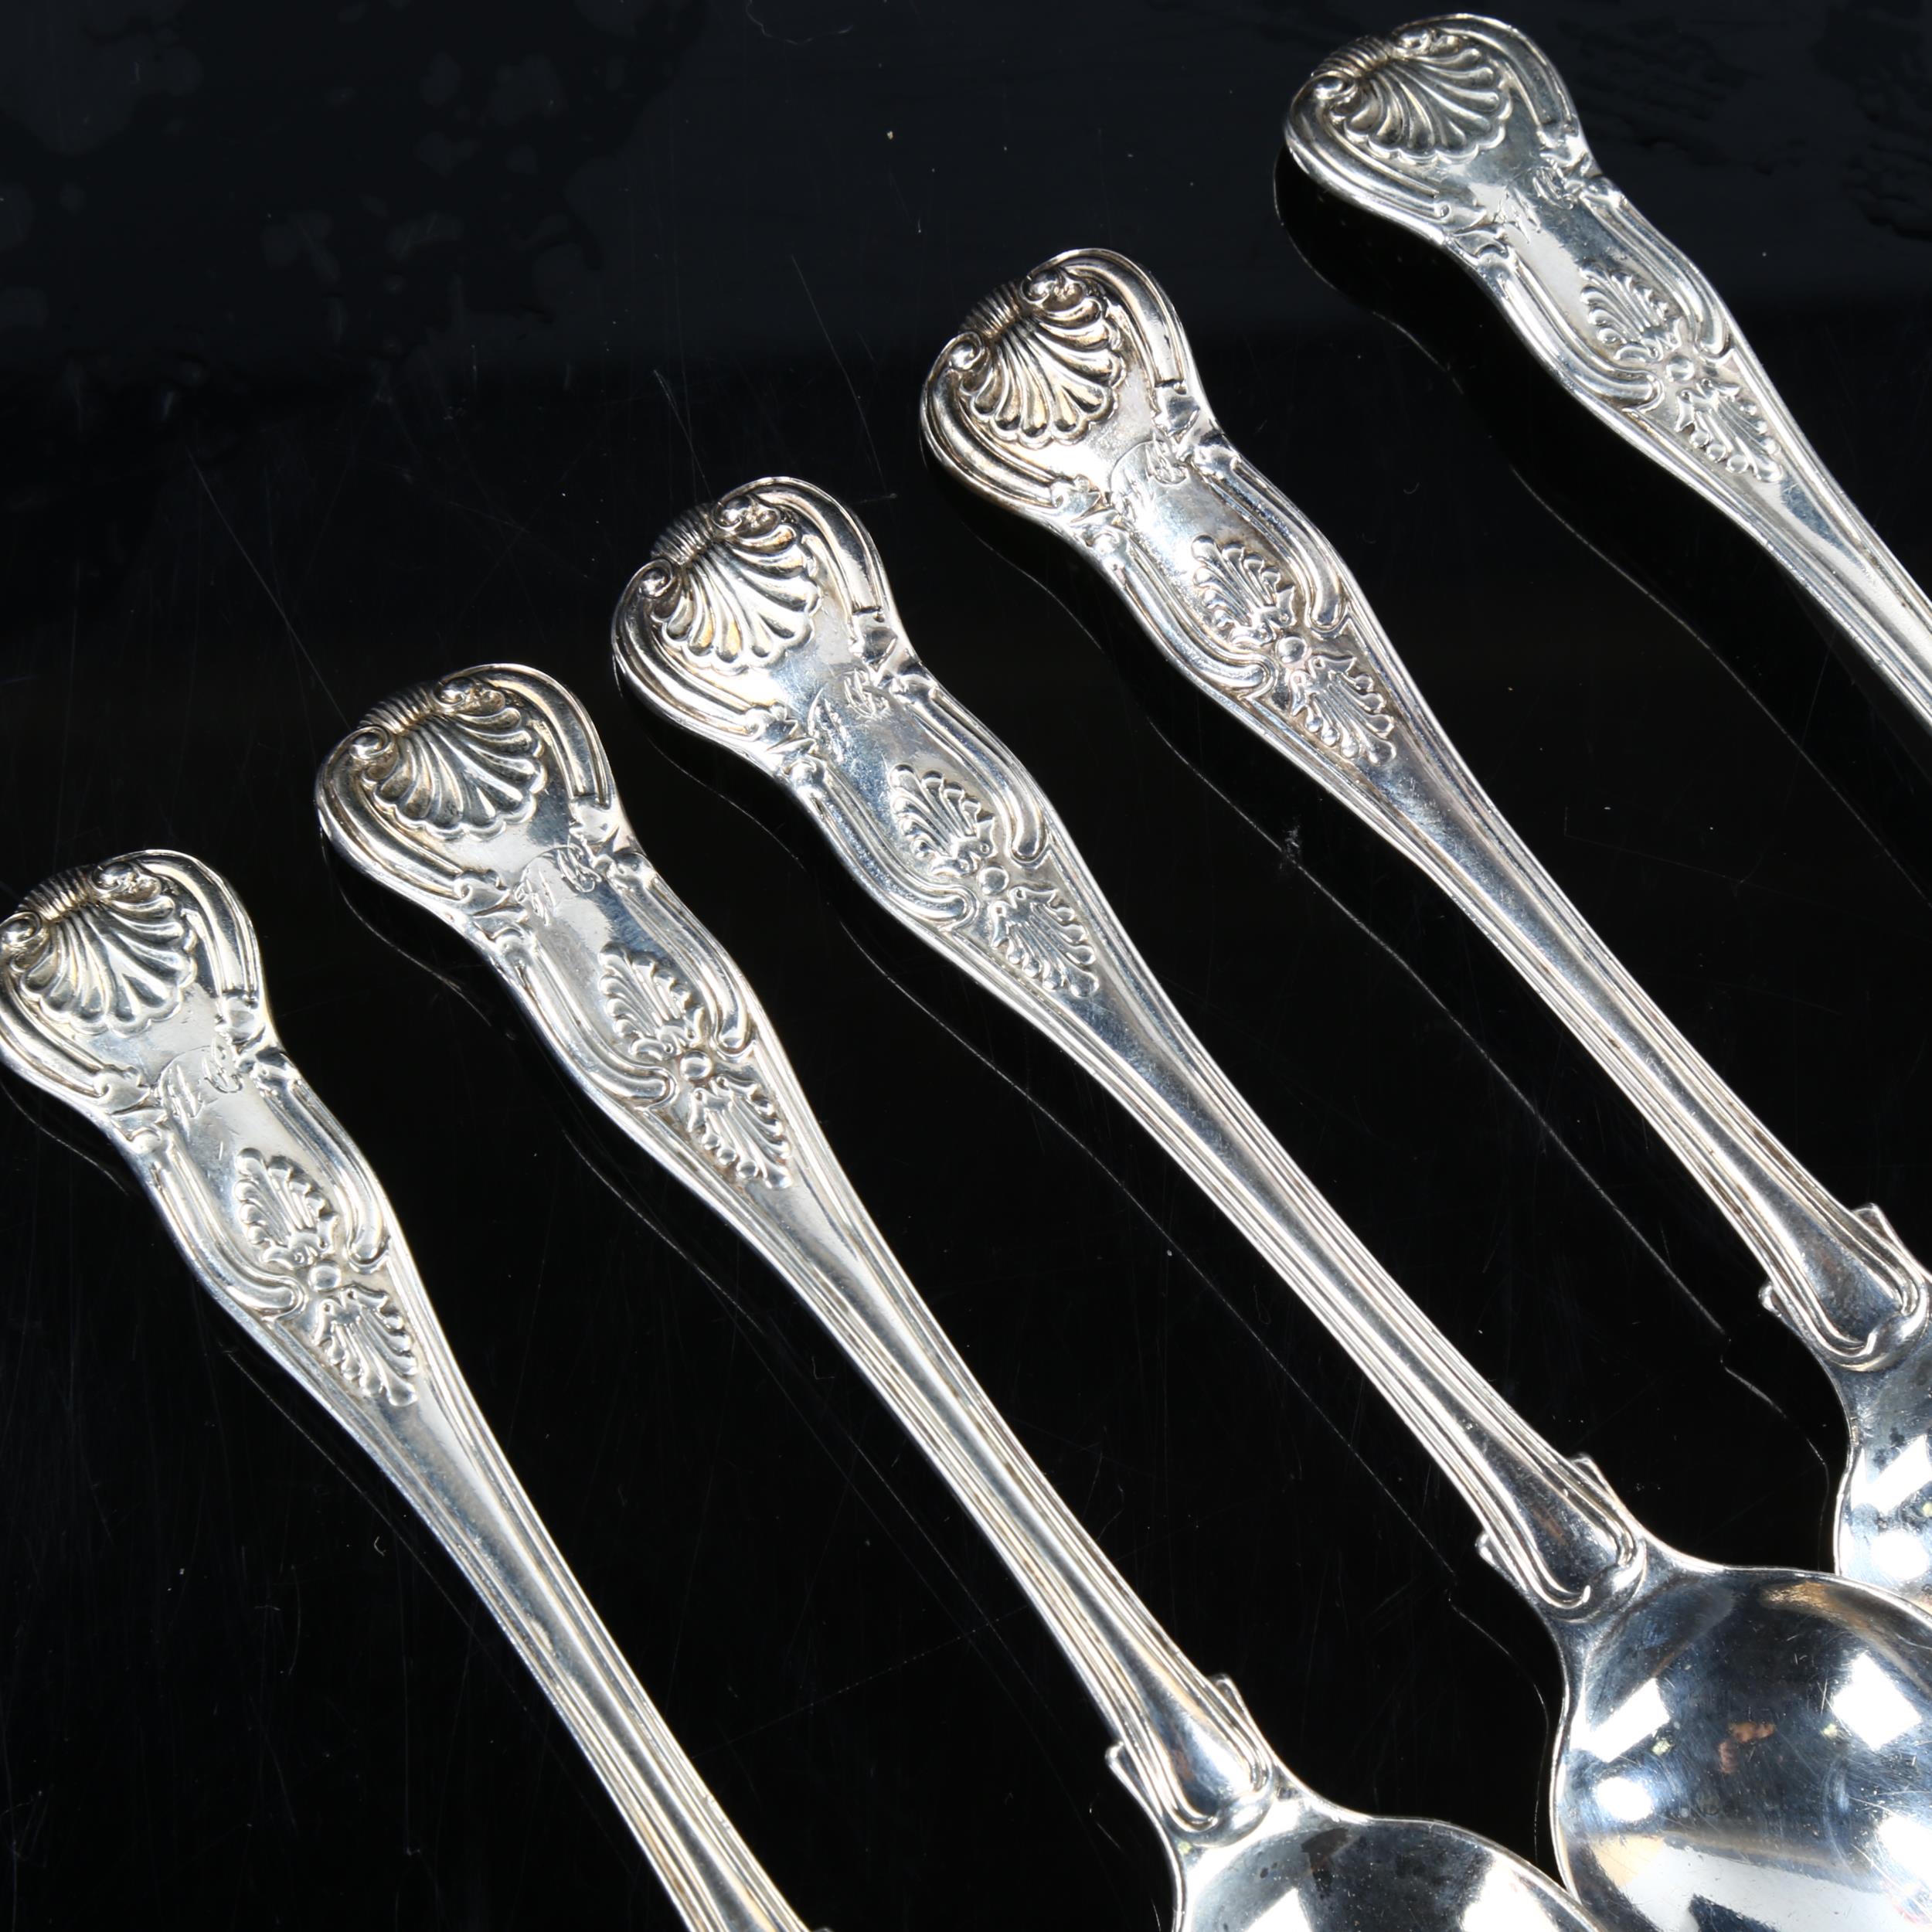 A set of 5 William IV silver King's pattern teaspoons, by Mary Chawner, hallmarks London 1834, - Image 2 of 3